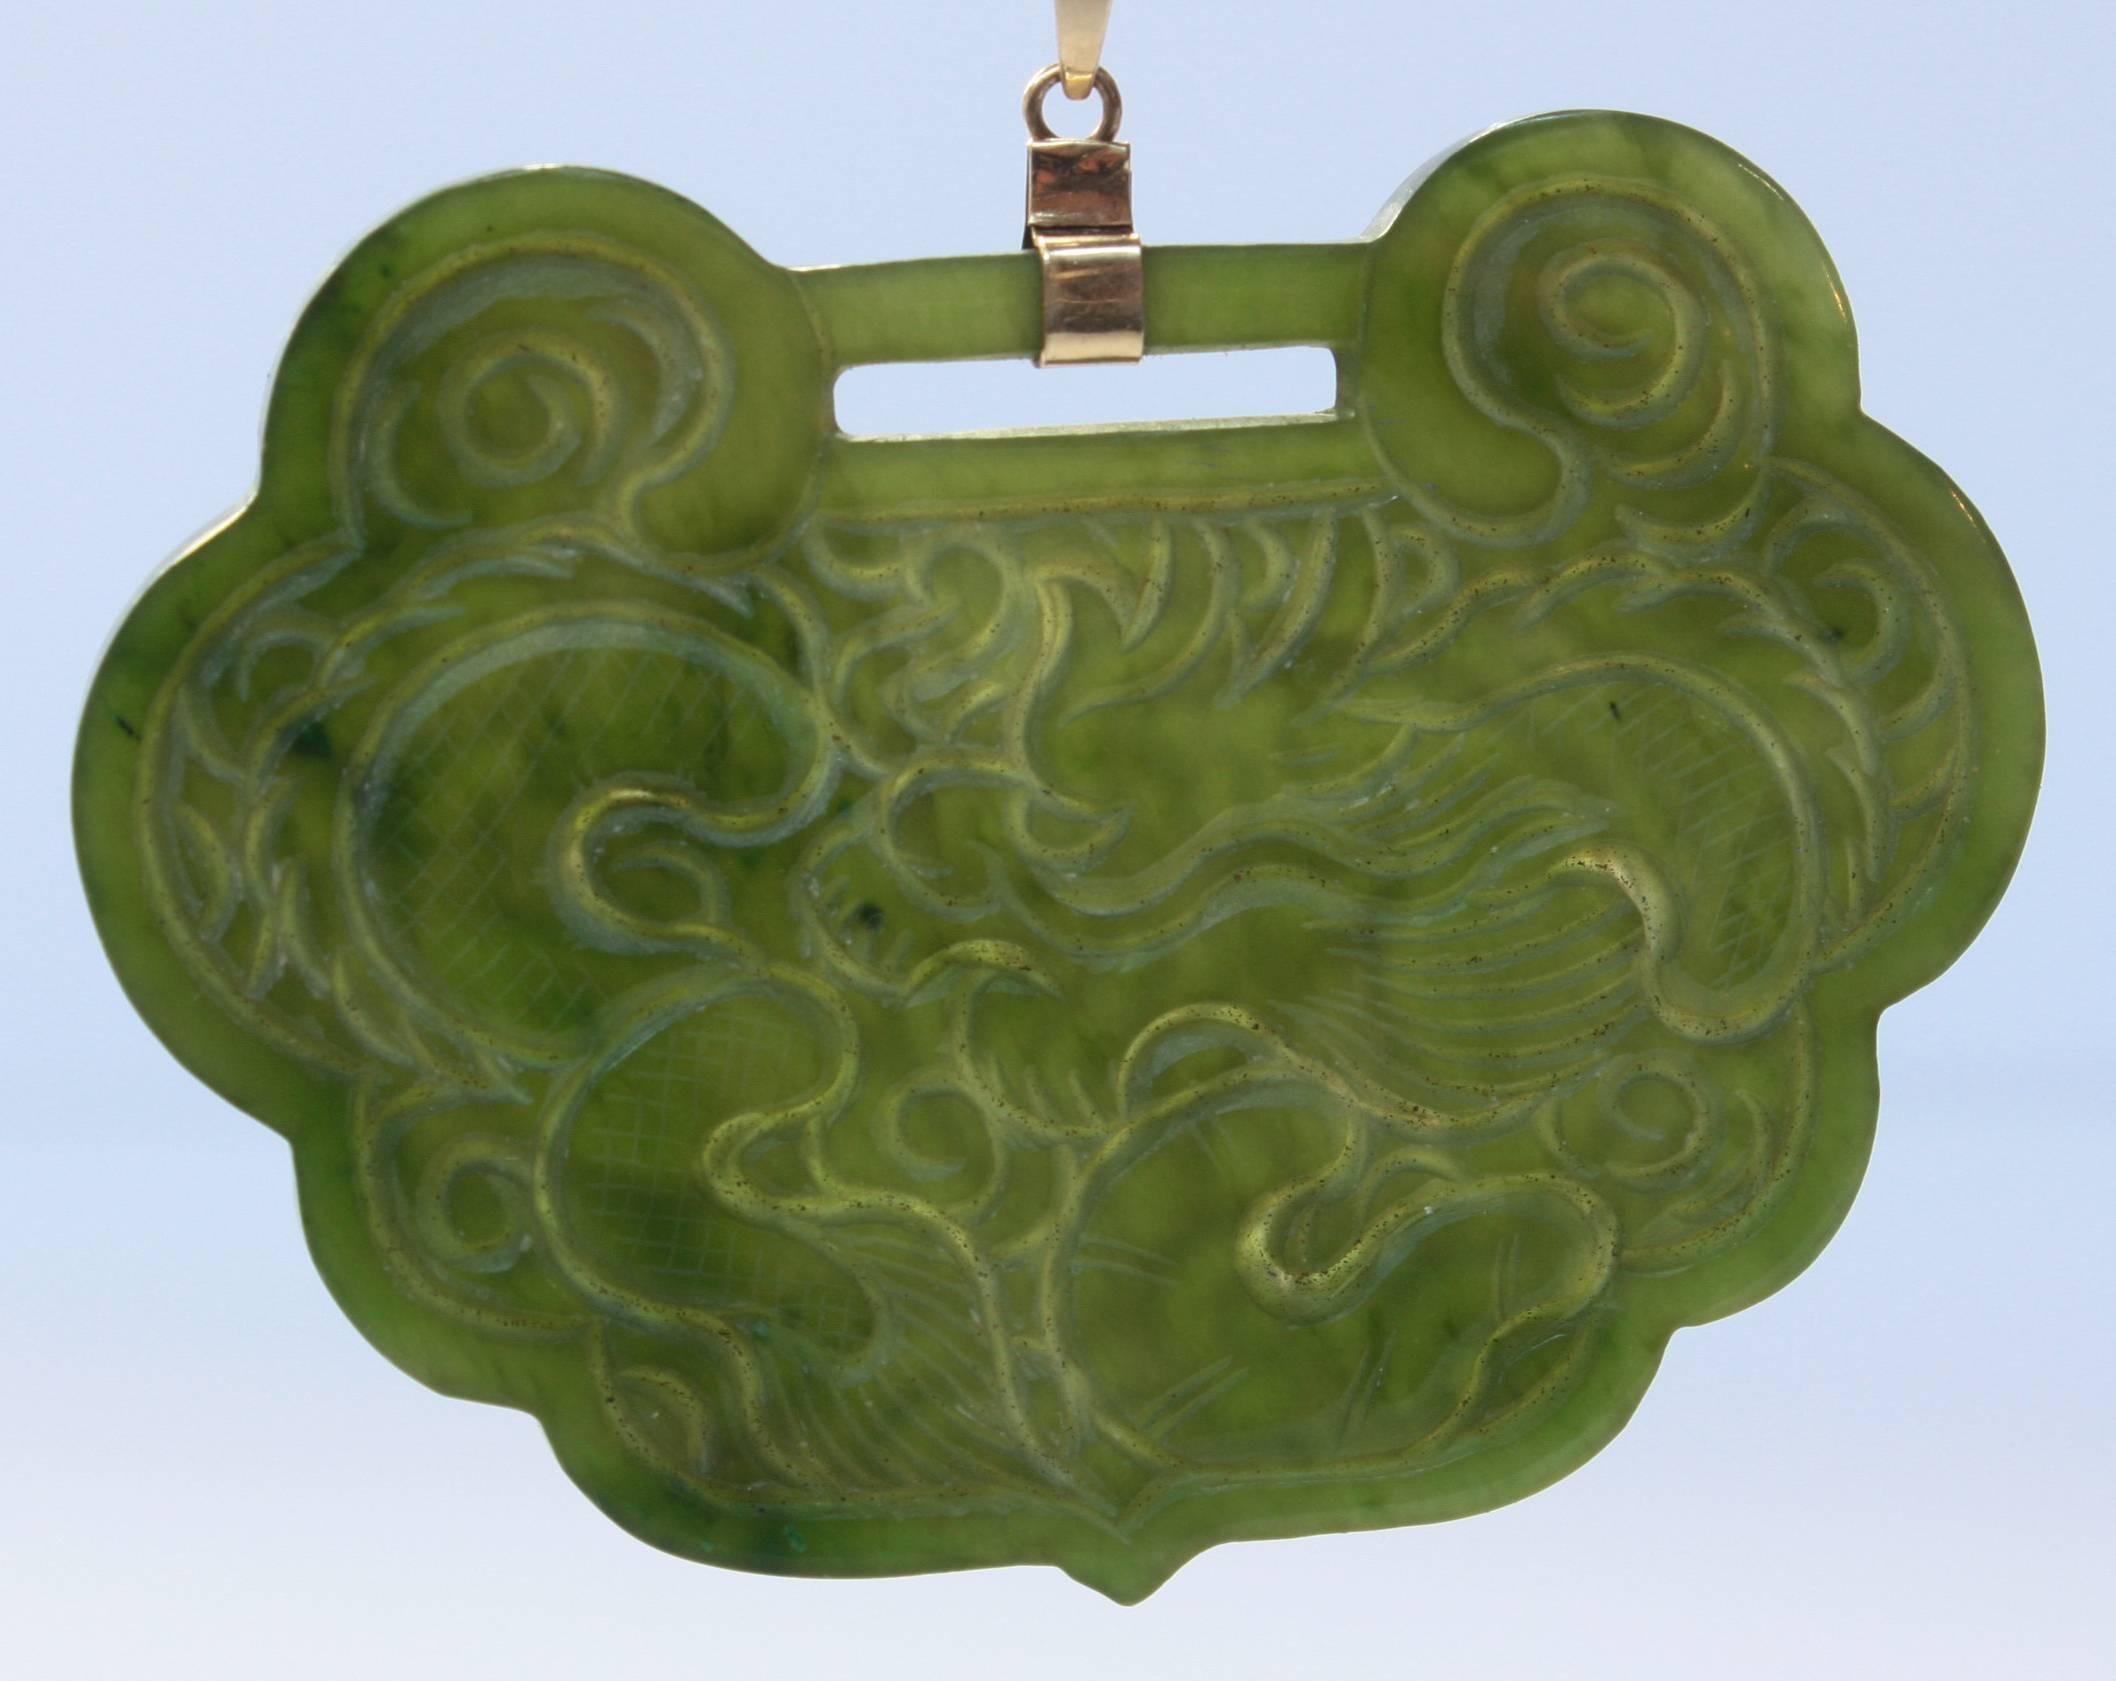 Hand-carved green jade pendant. Carved dragon on one side and koi on the reverse side.